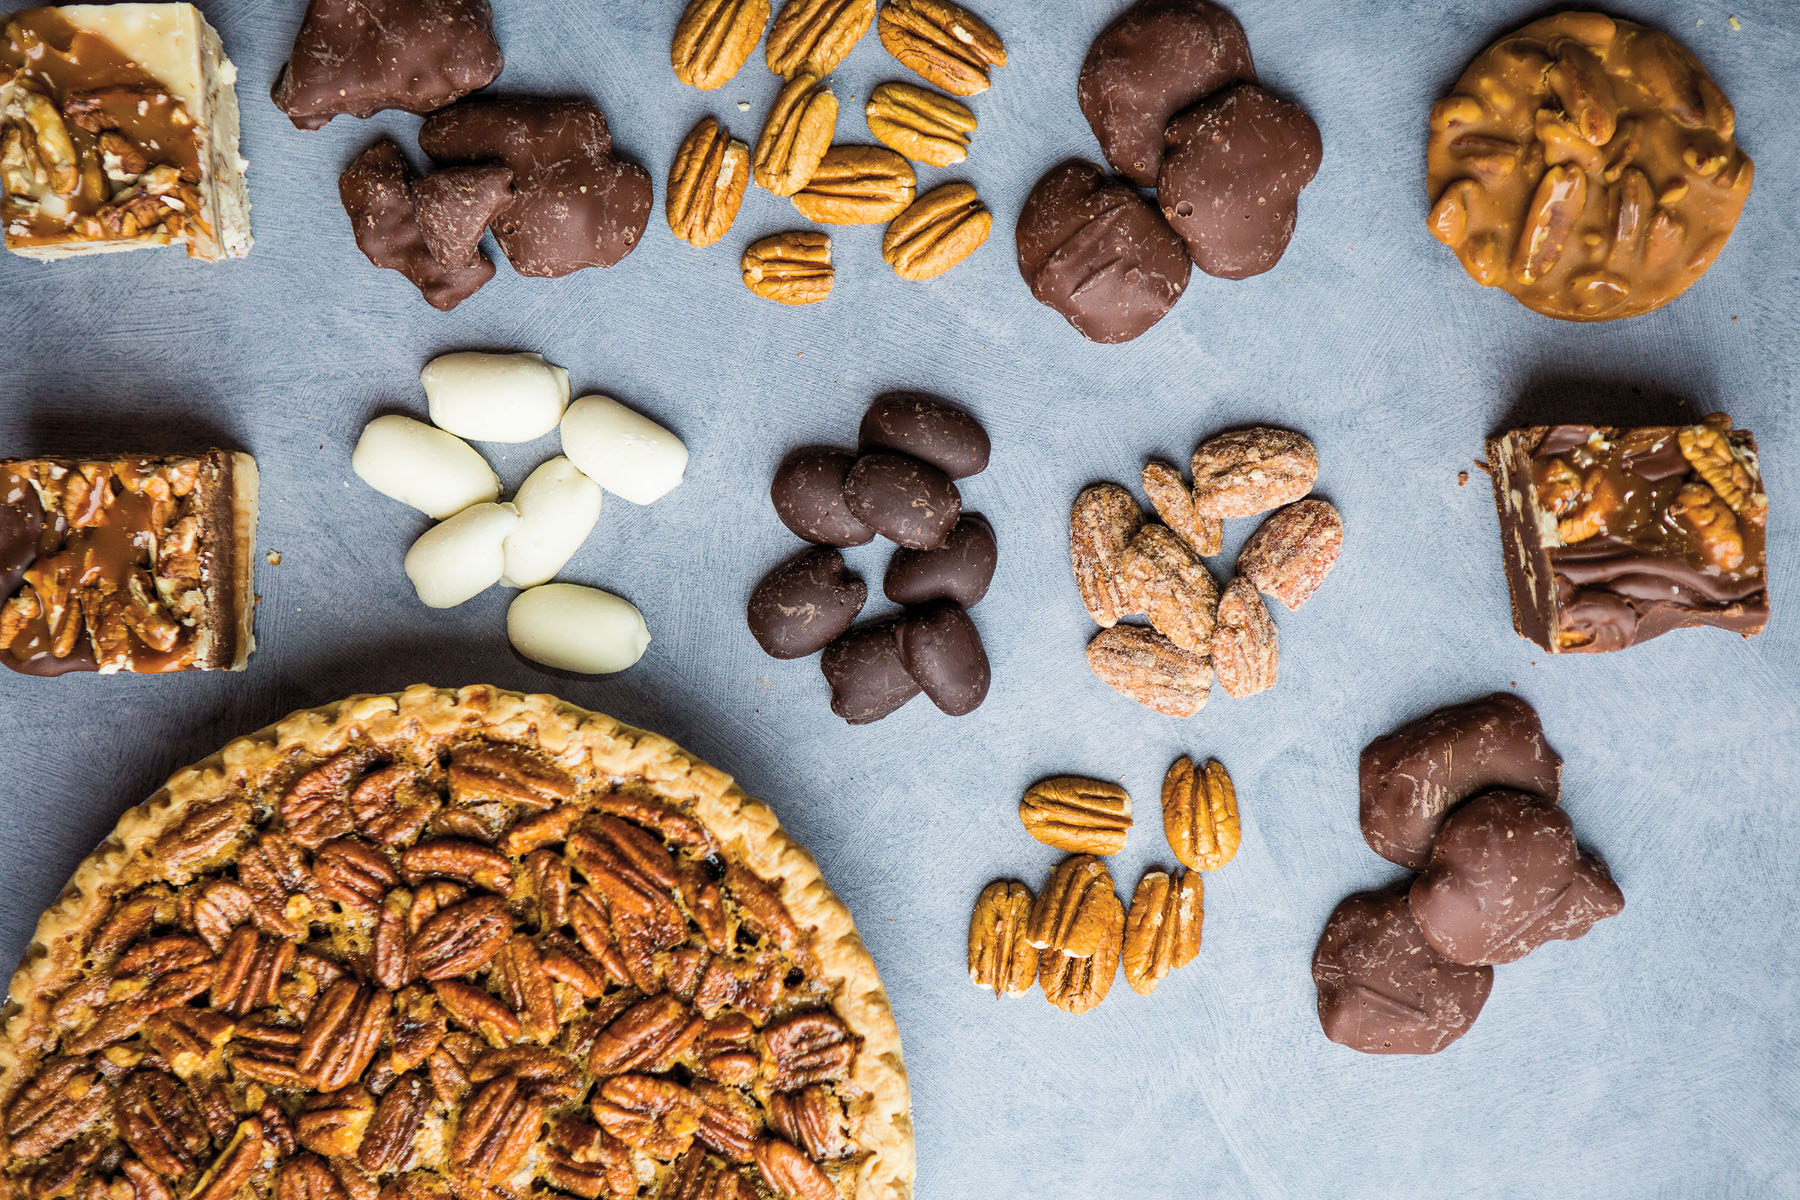 An areal photo showing chocolate covered pecans, a pecan pie, sugared pecans and pecan bars